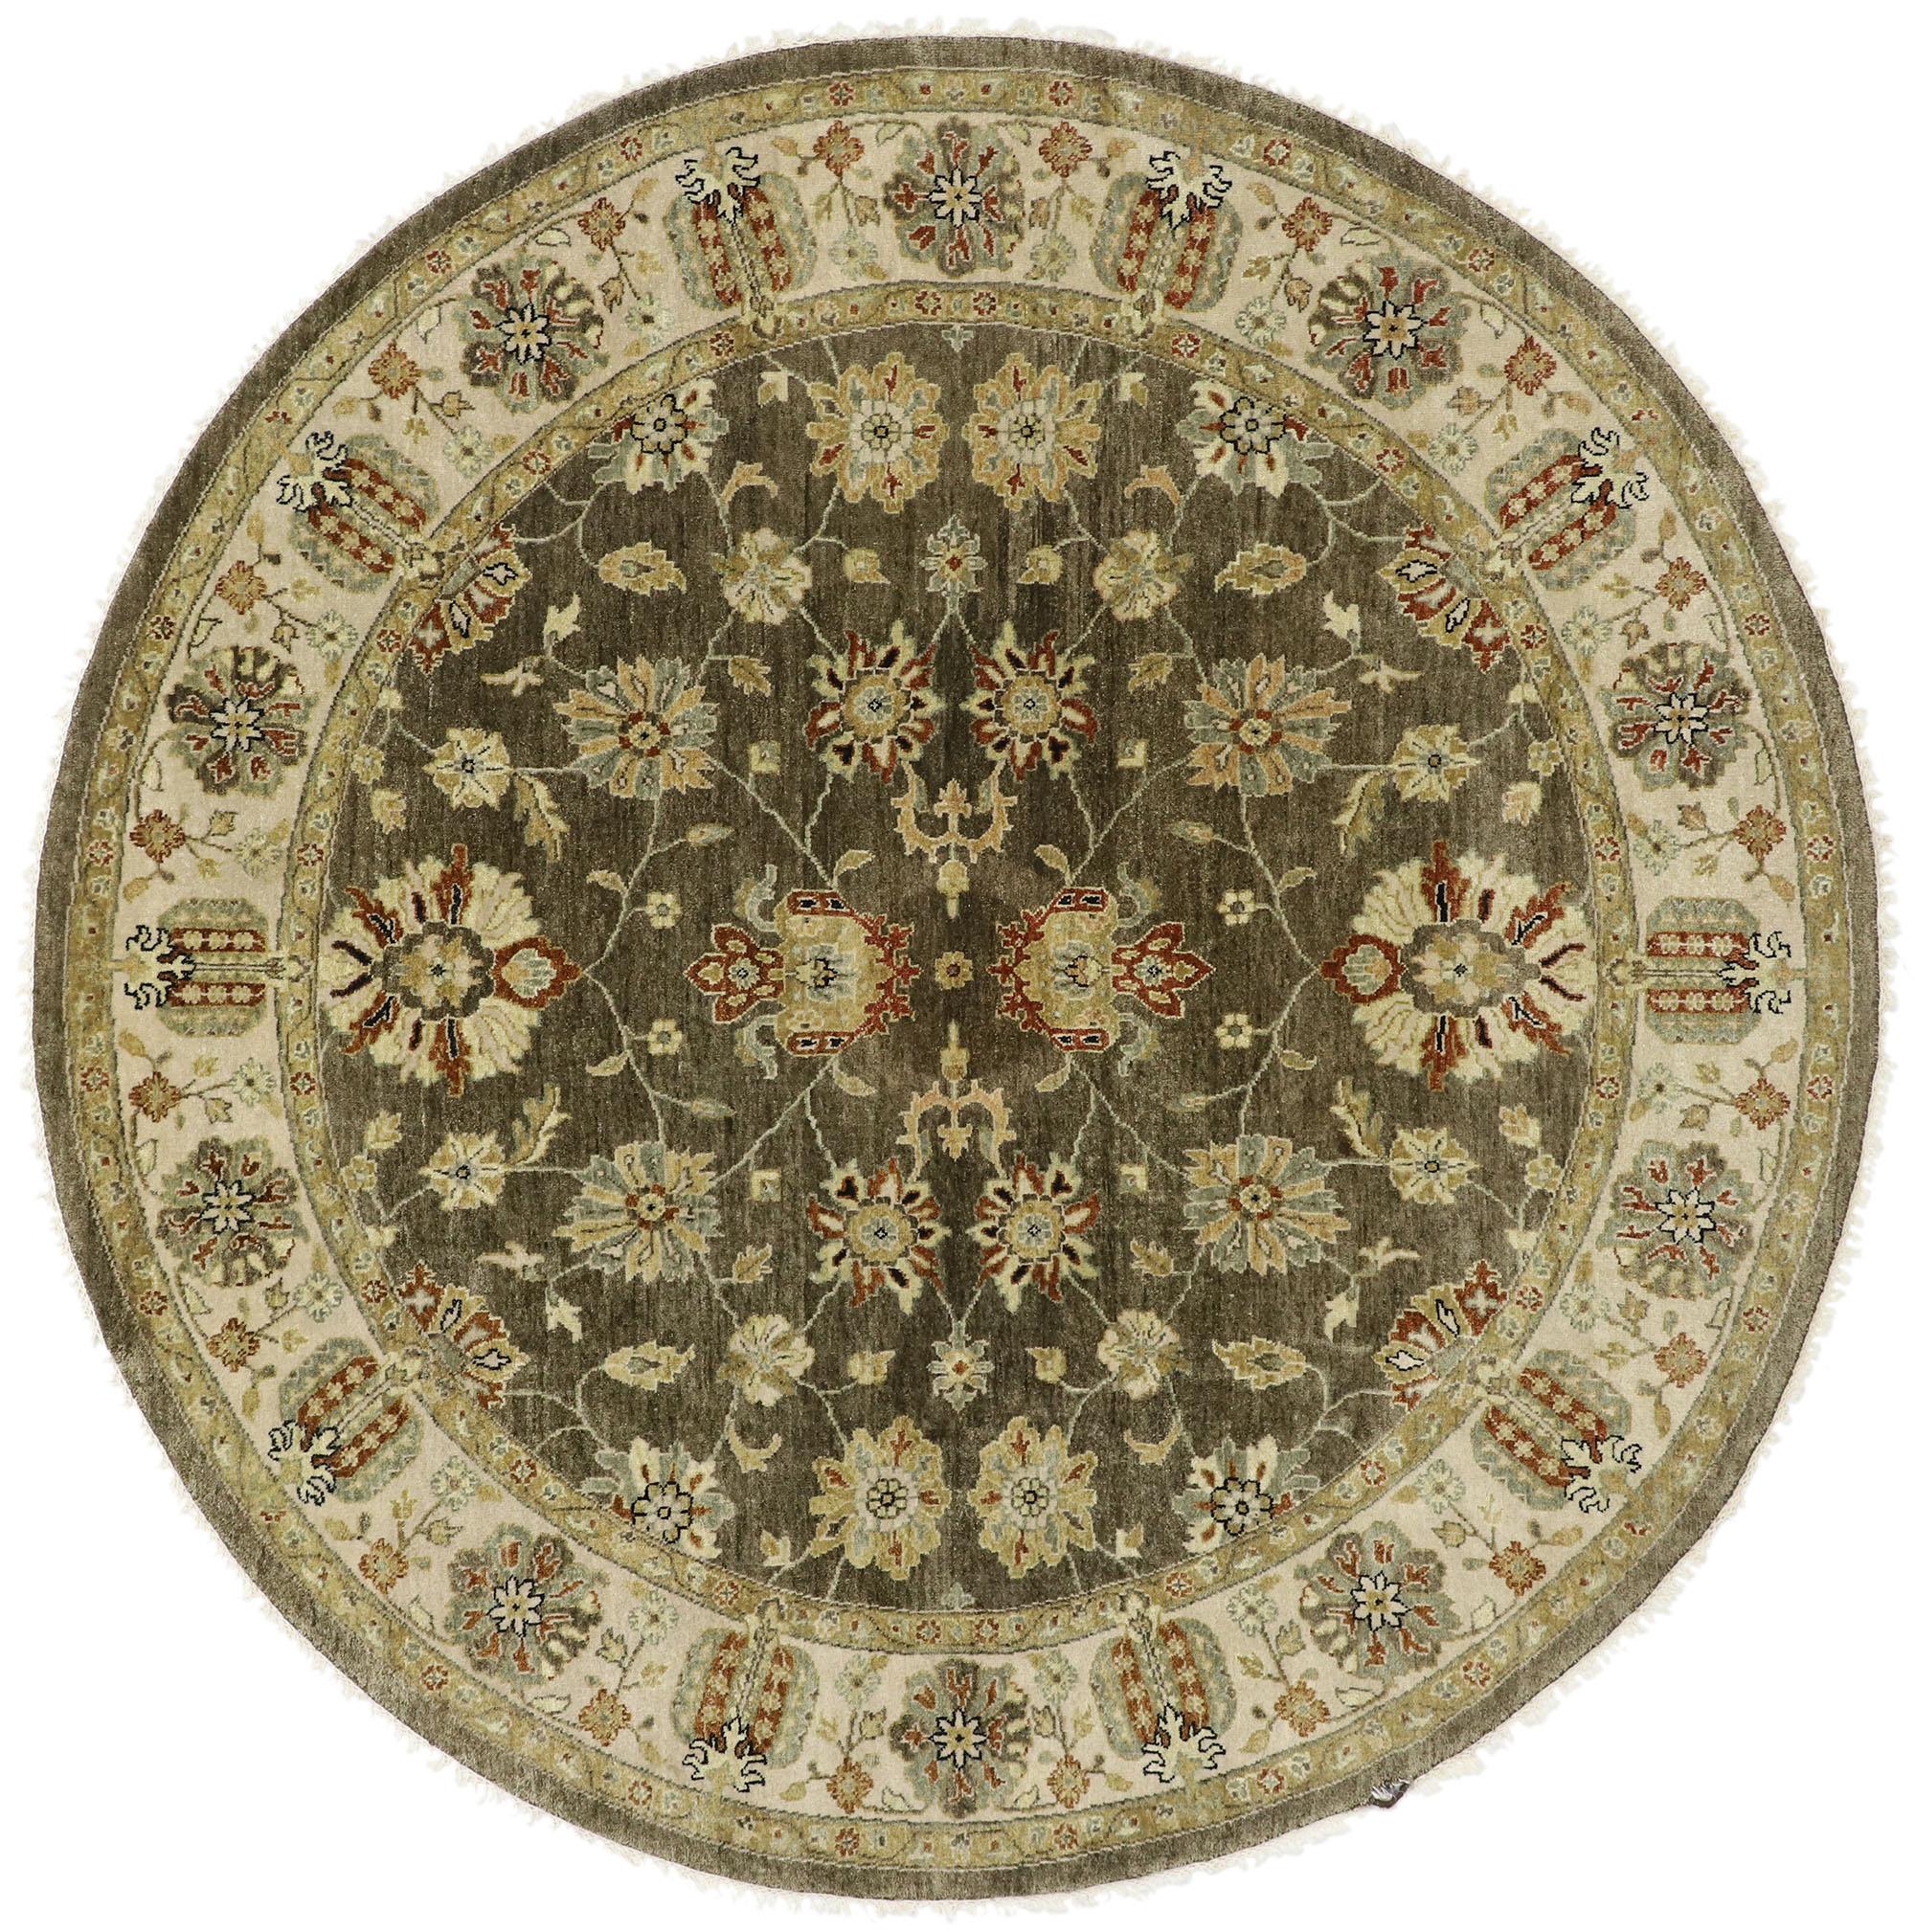 Wool Vintage Indian Round Area Rug, Circular Rug with Arts and Crafts Style For Sale